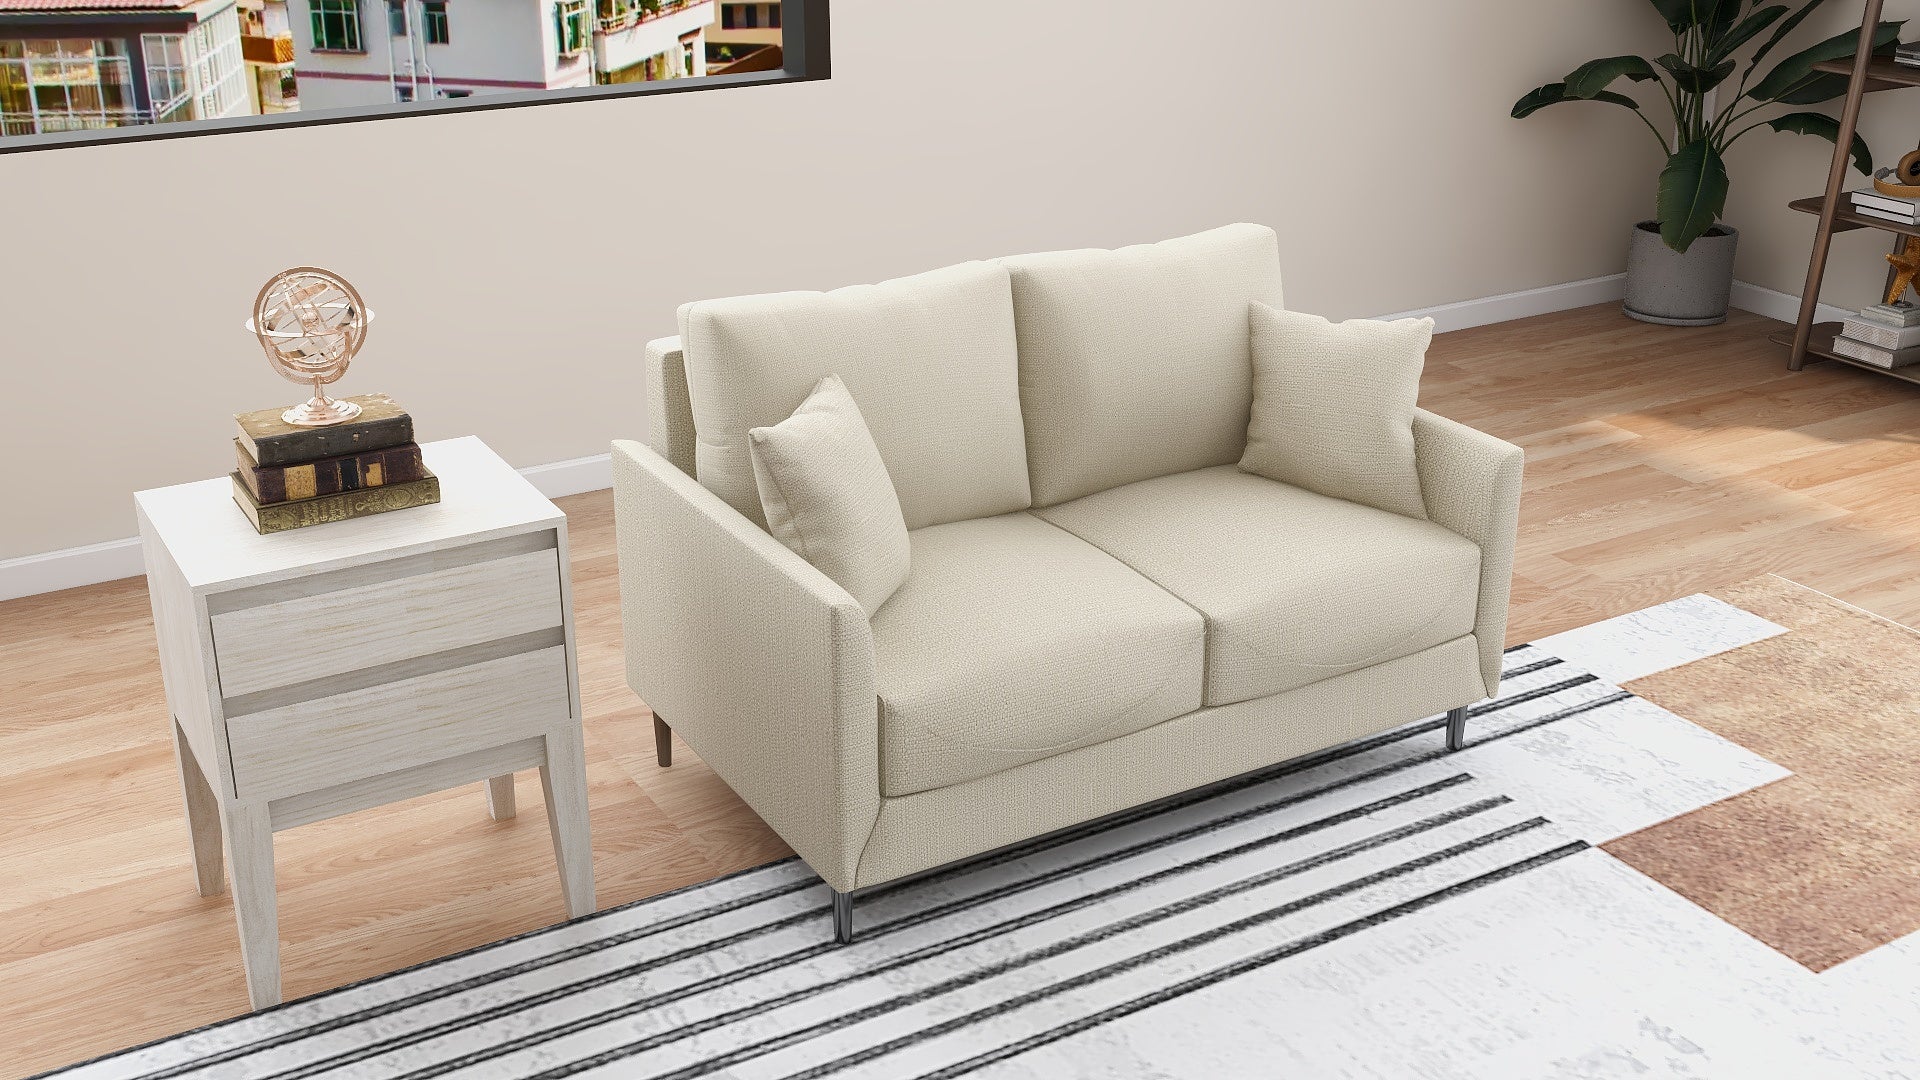 ASTRO 2 Seater Fabric Sofa AF Home